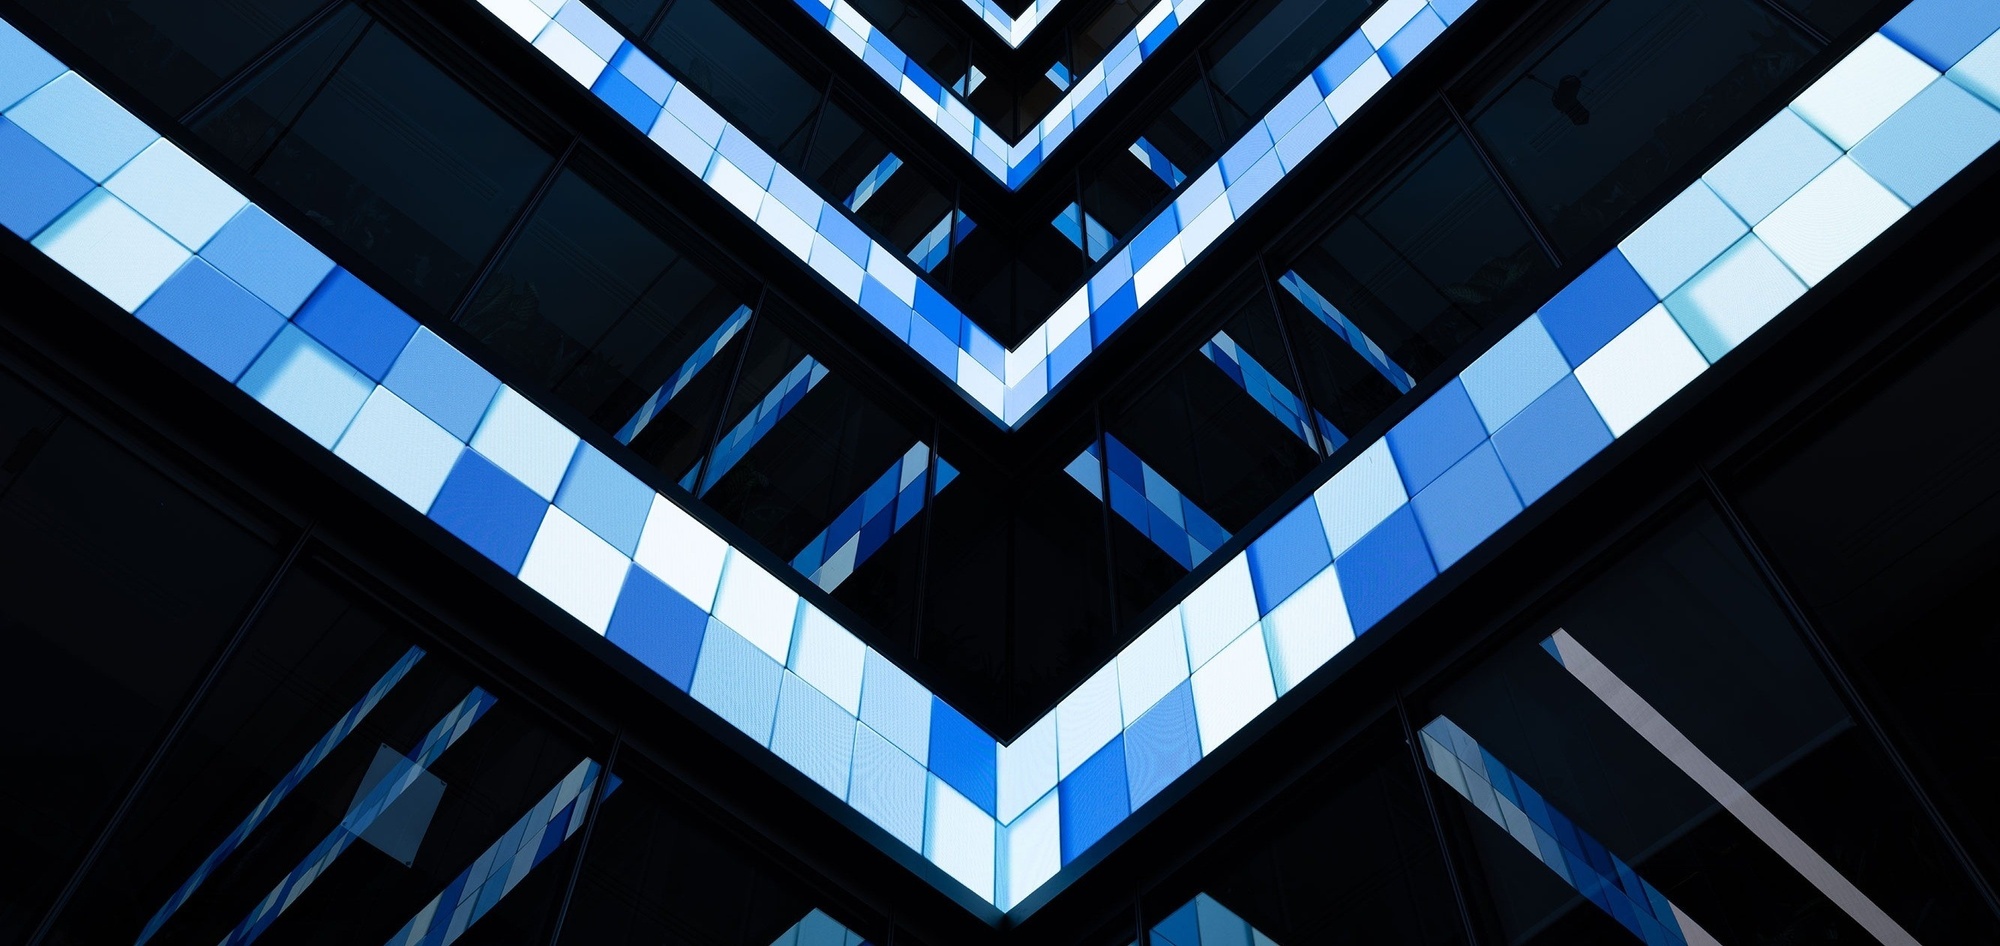 Four large-scale horizontal screens on the interior walls of the building atrium, displaying 3D blue and white square graphics